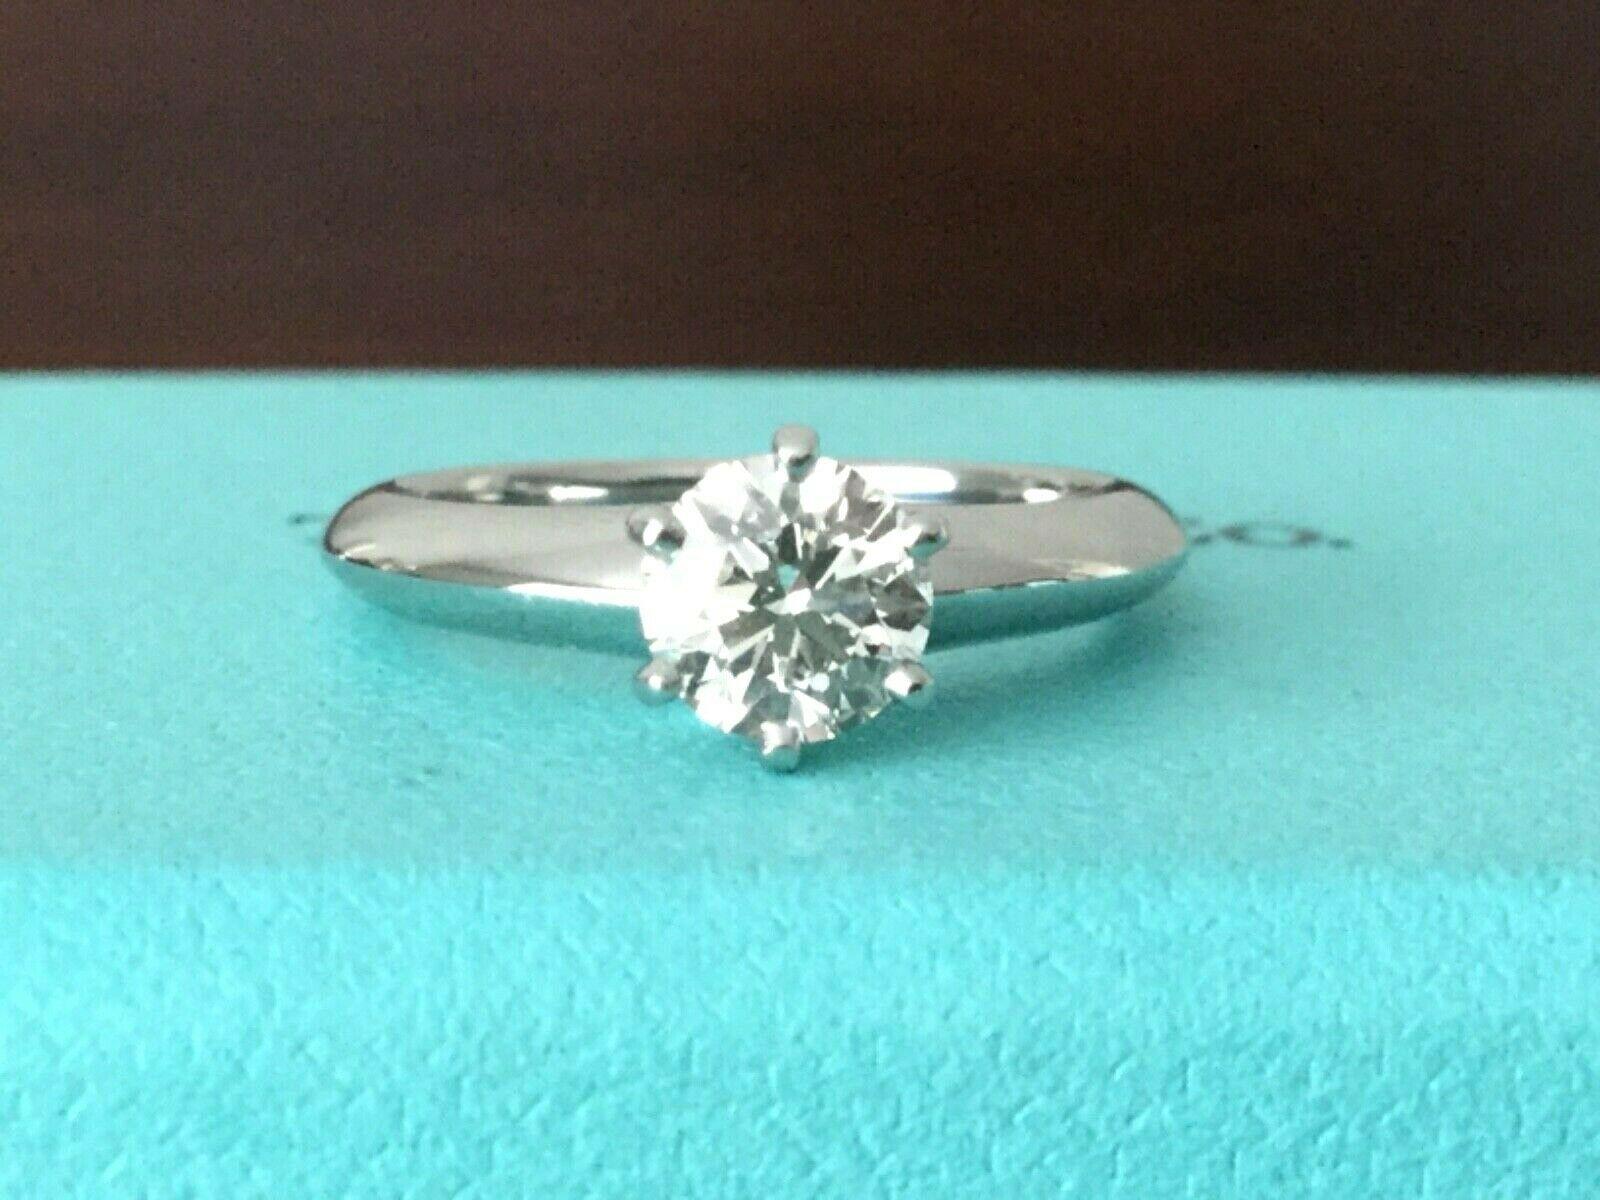 Being offered for your consideration is a like new Tiffany & Co Platinum and Diamond .78 carat natural round engagement ring set in the classic 6 prong setting. 

The ring has been professionally cleaned and polished to like new condition and